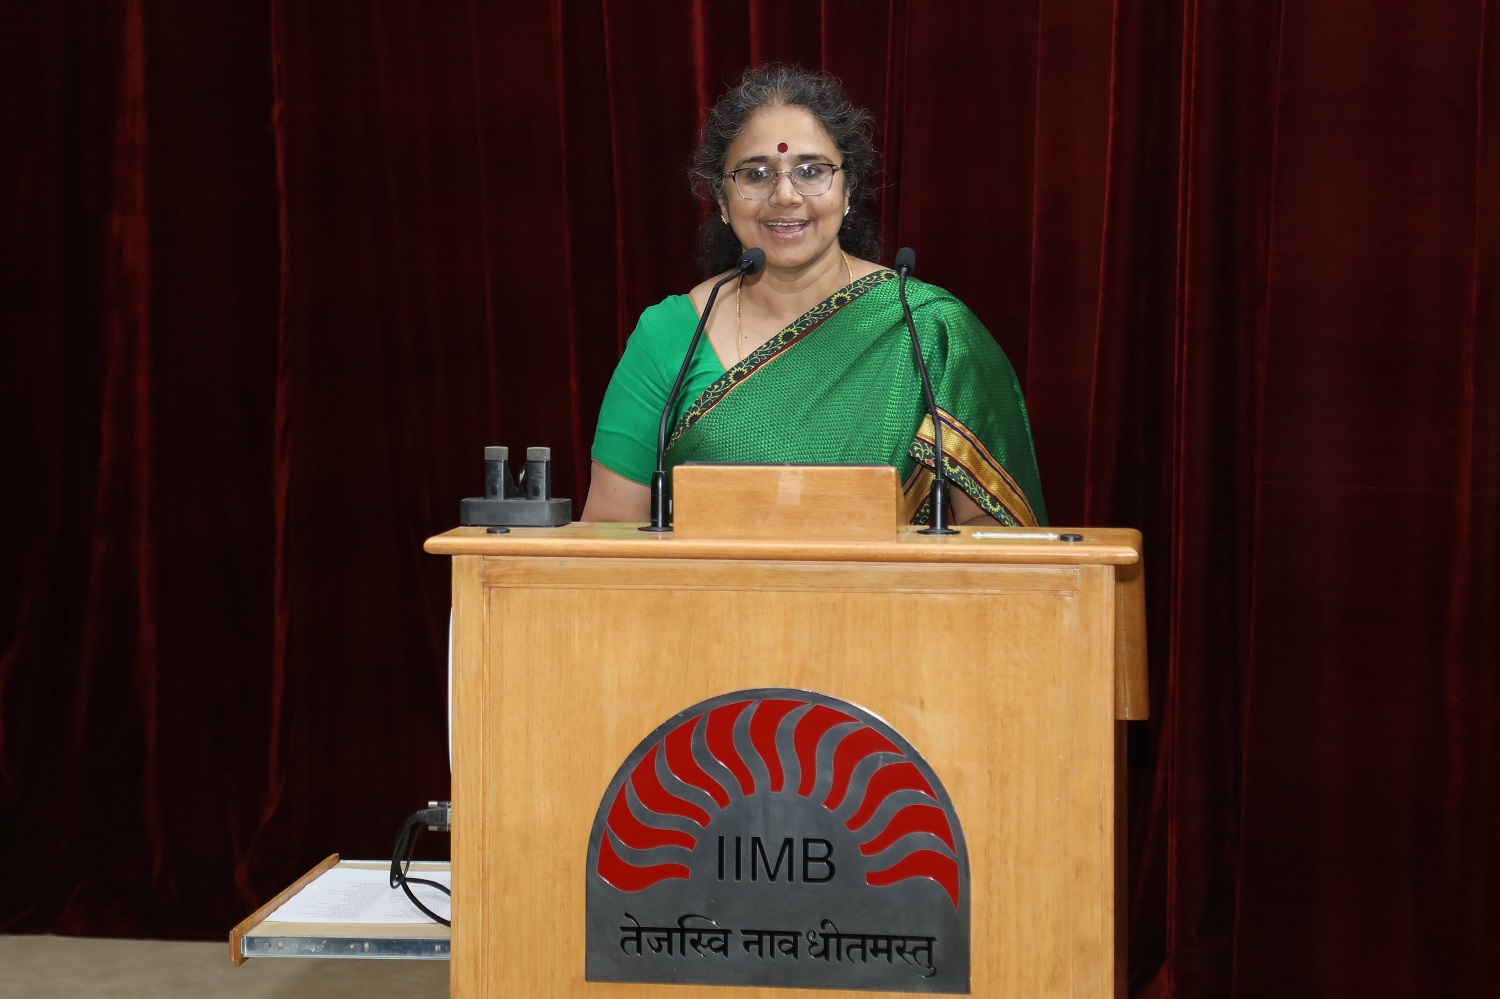 Professor Vasanthi Srinivasan, Programme Director, Business Management Programme for Defence Officers, IIMB, welcomes chief guest and participants to the valedictory ceremony of Business Management Programme for Defence Officers on 13 January 2023.